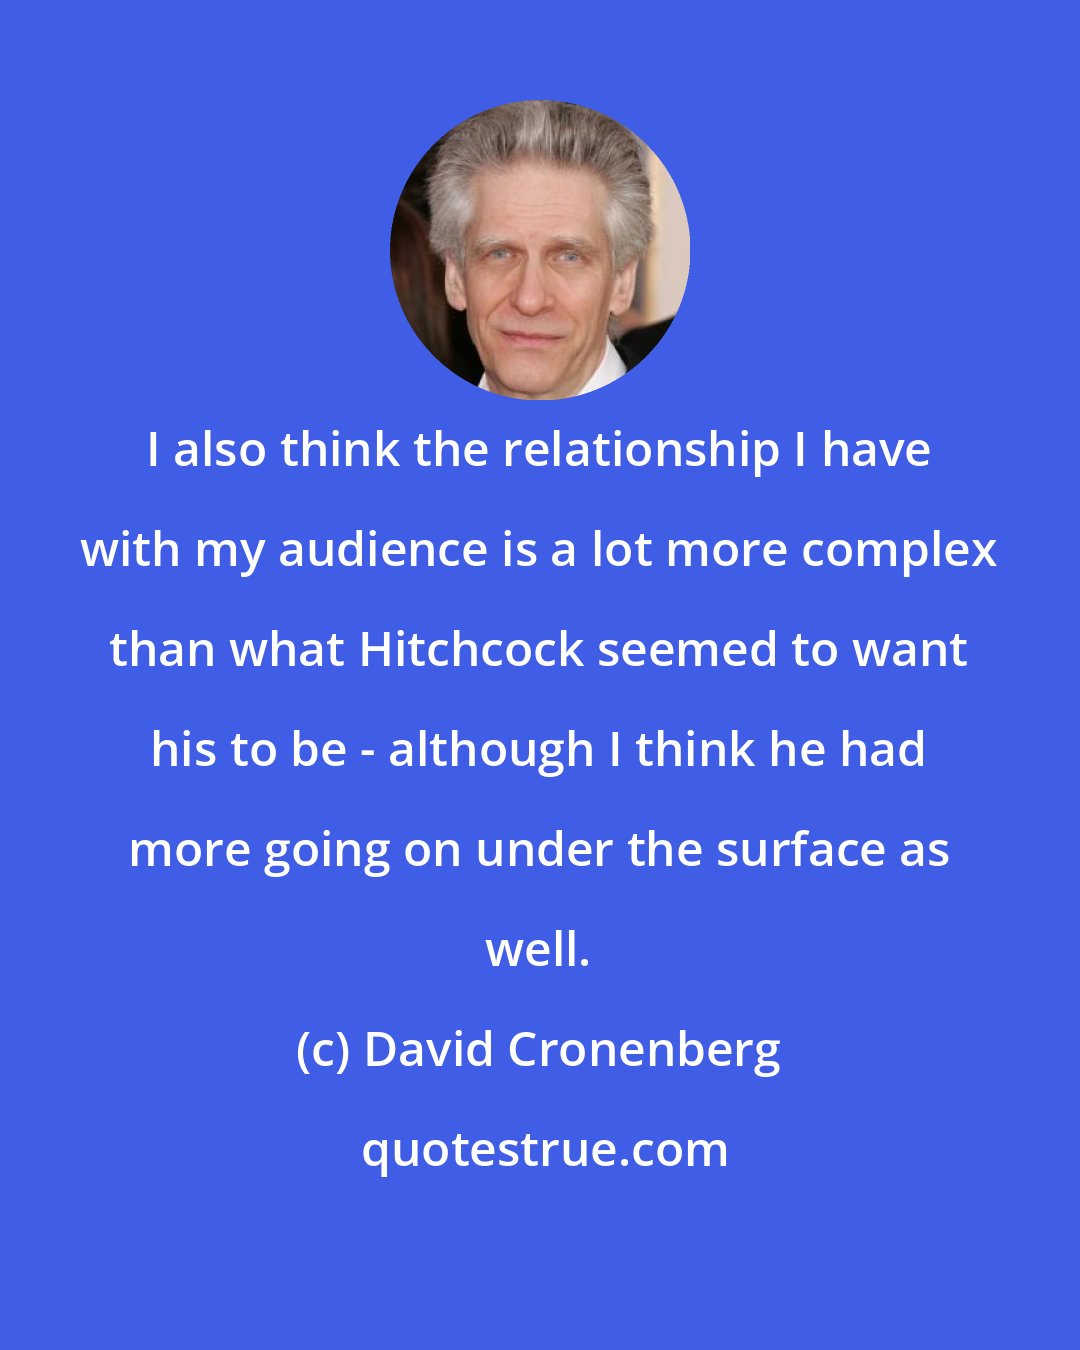 David Cronenberg: I also think the relationship I have with my audience is a lot more complex than what Hitchcock seemed to want his to be - although I think he had more going on under the surface as well.